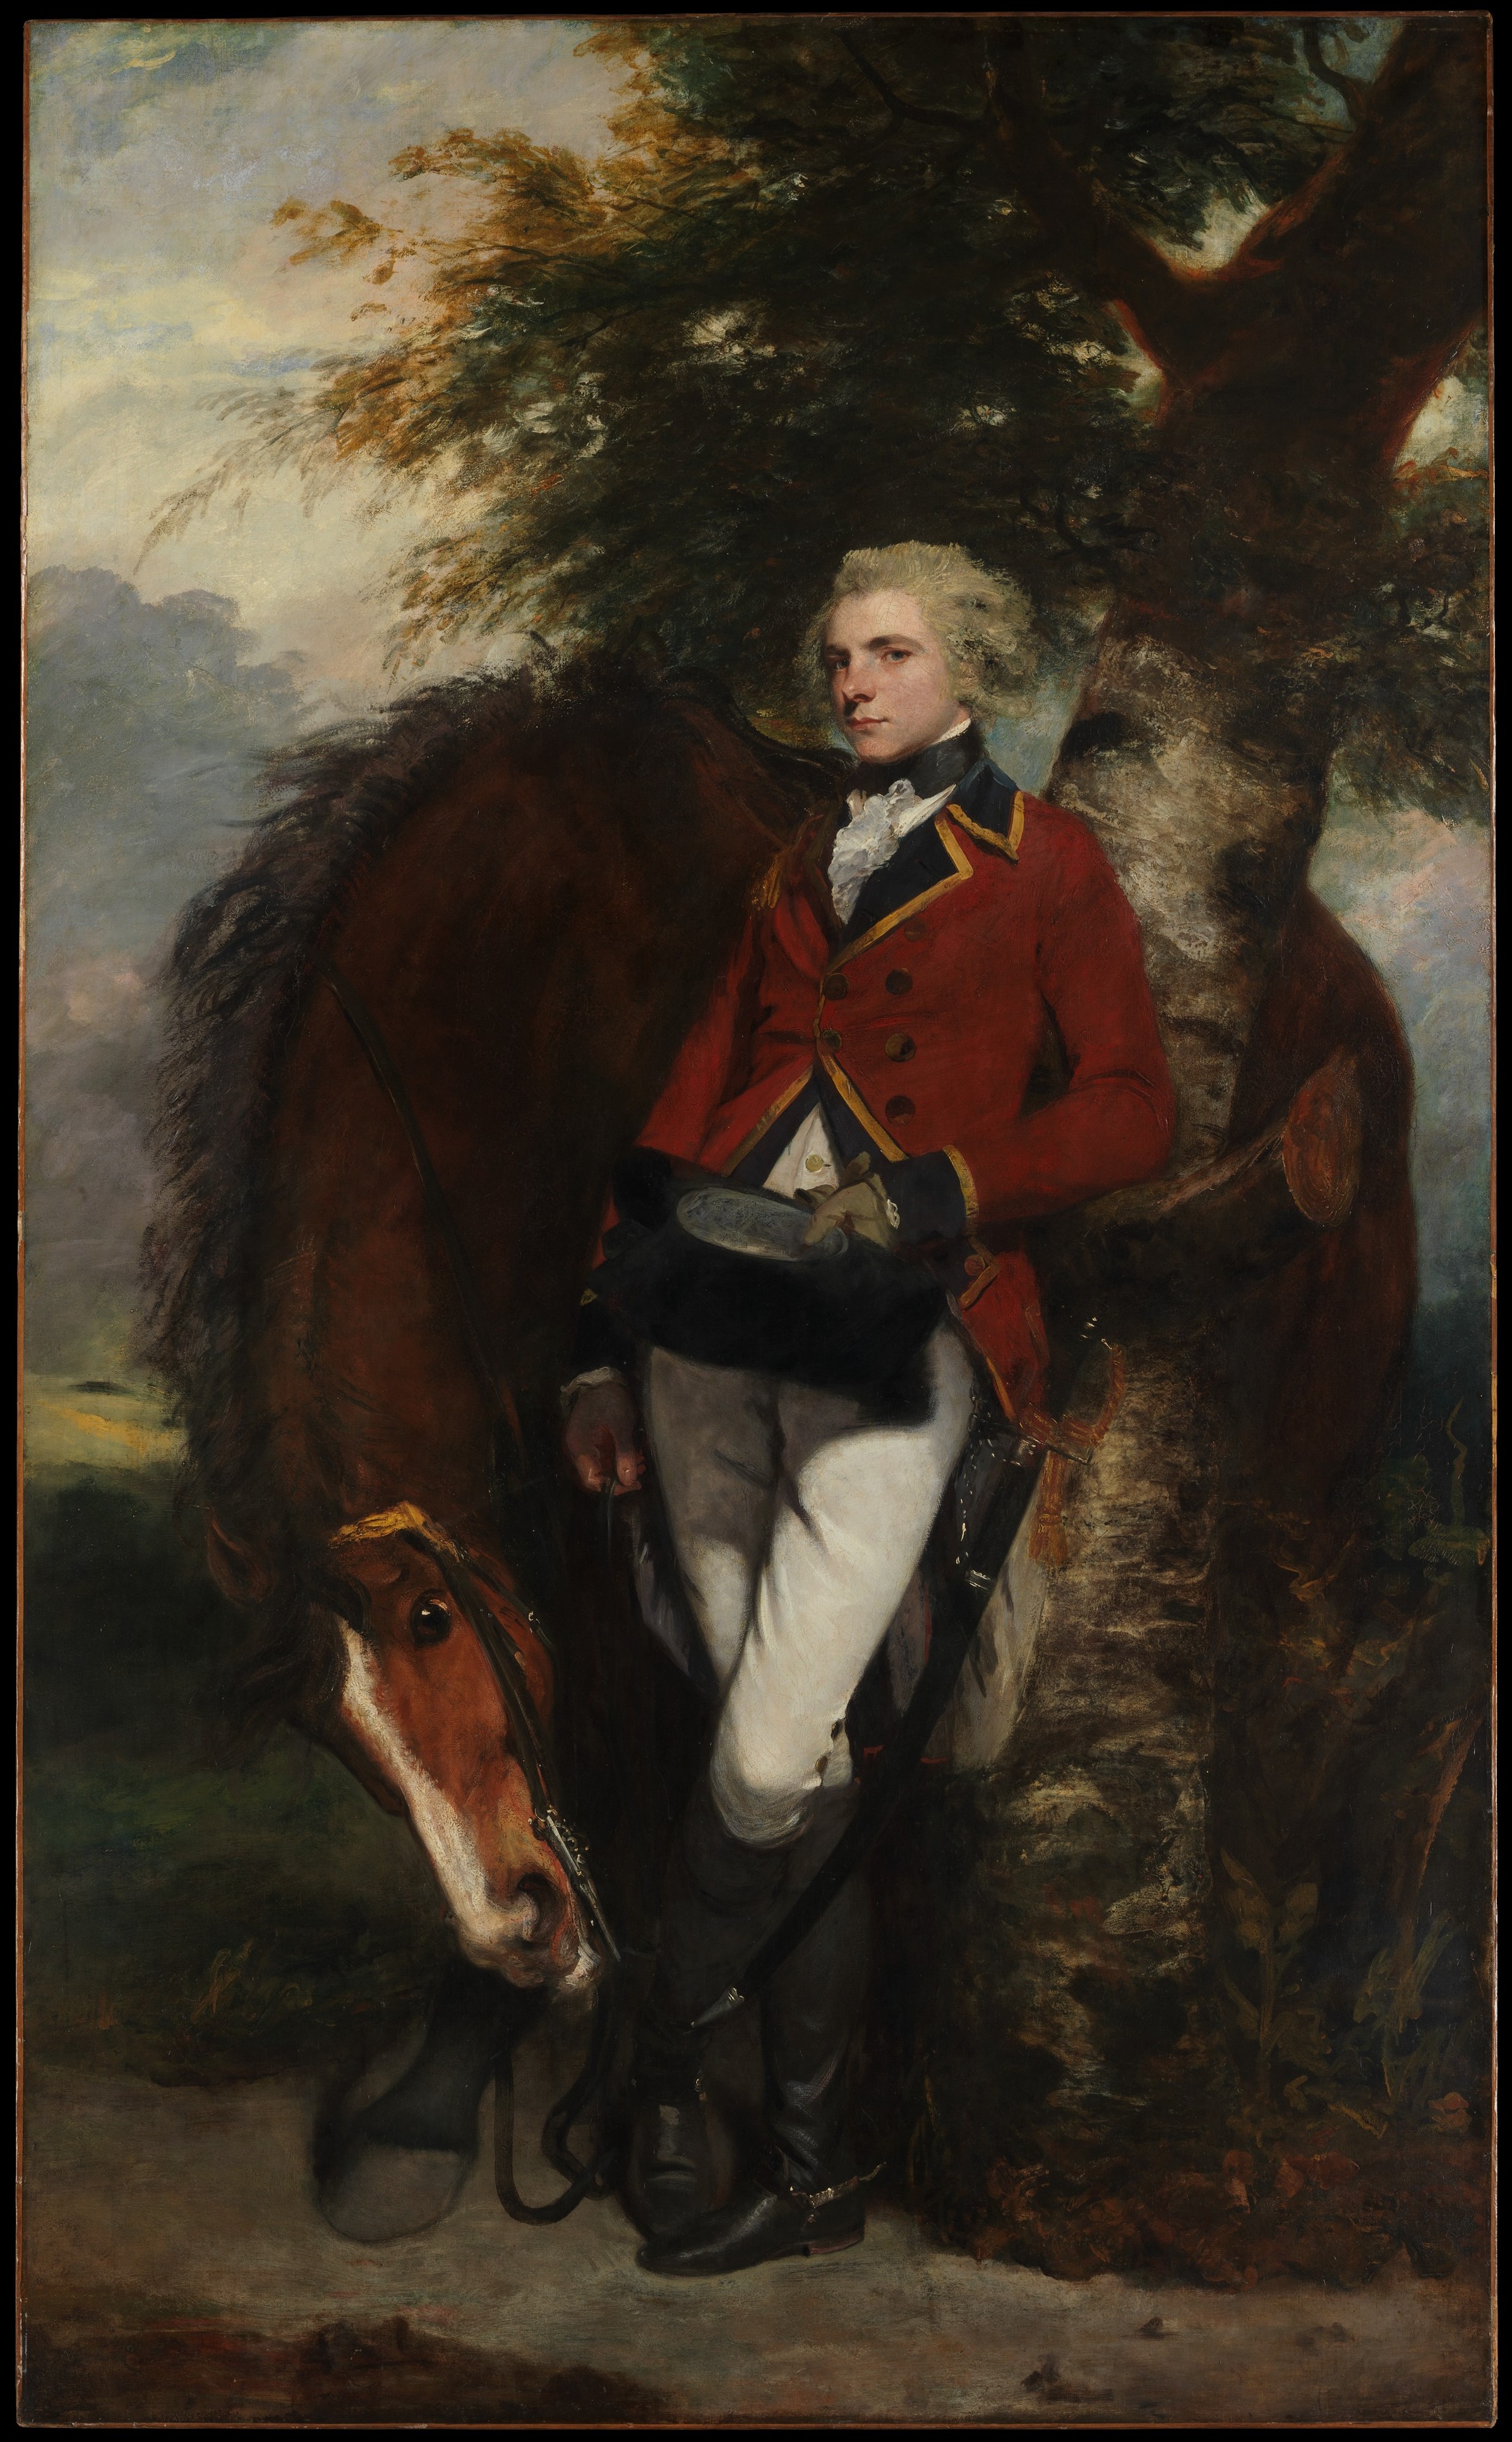 Captain George K. H. Coussmaker by Joshua Reynolds - 1782 - 238.1 x 145.4 cm private collection